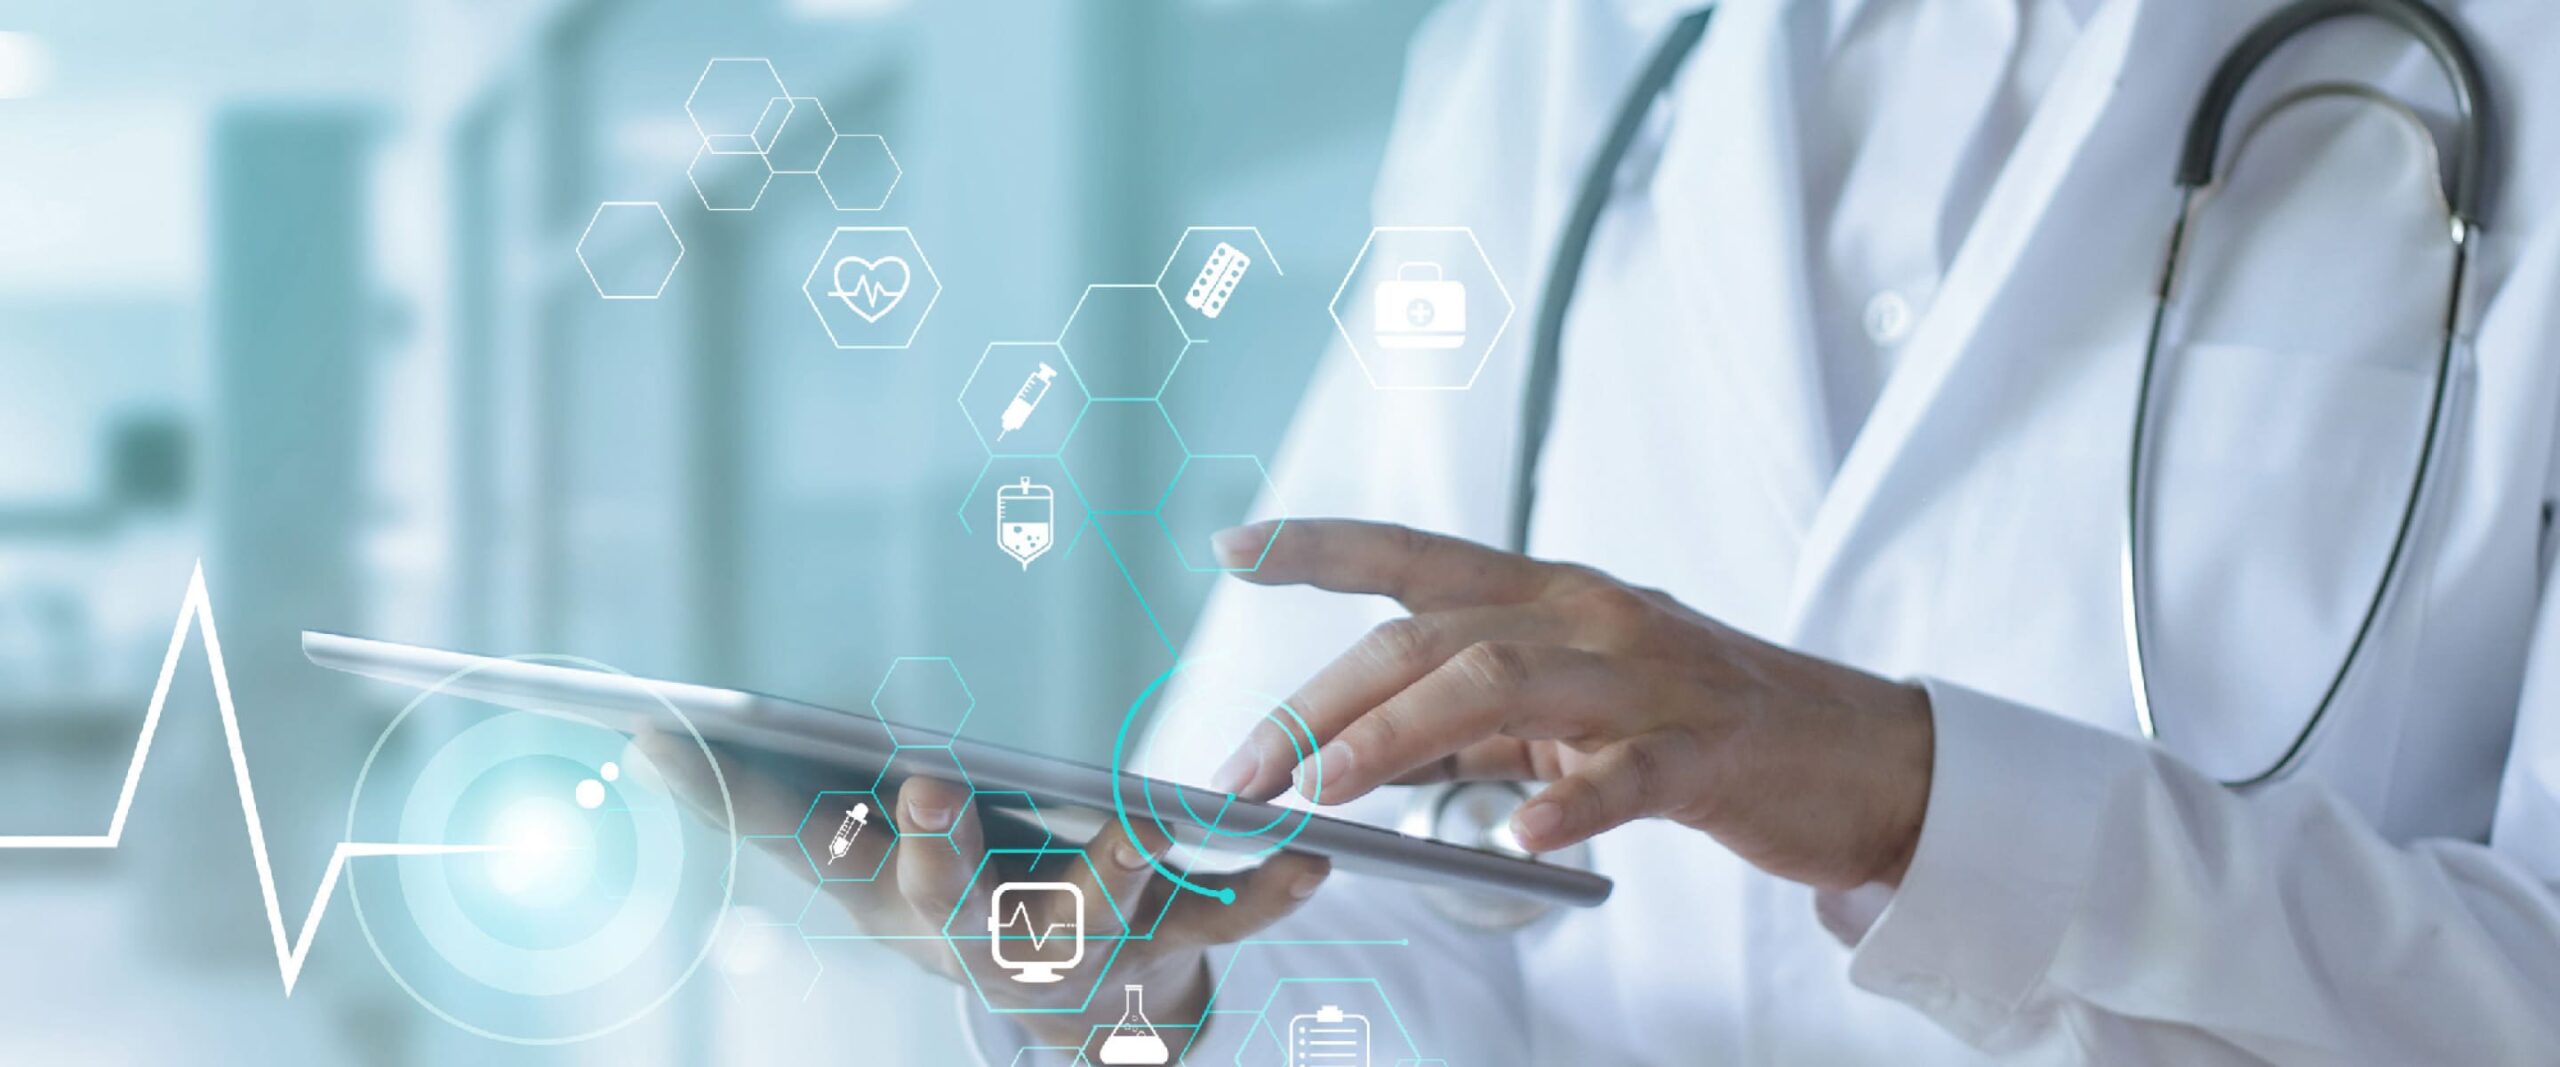 The Revolution of Technology in Healthcare and Medicine